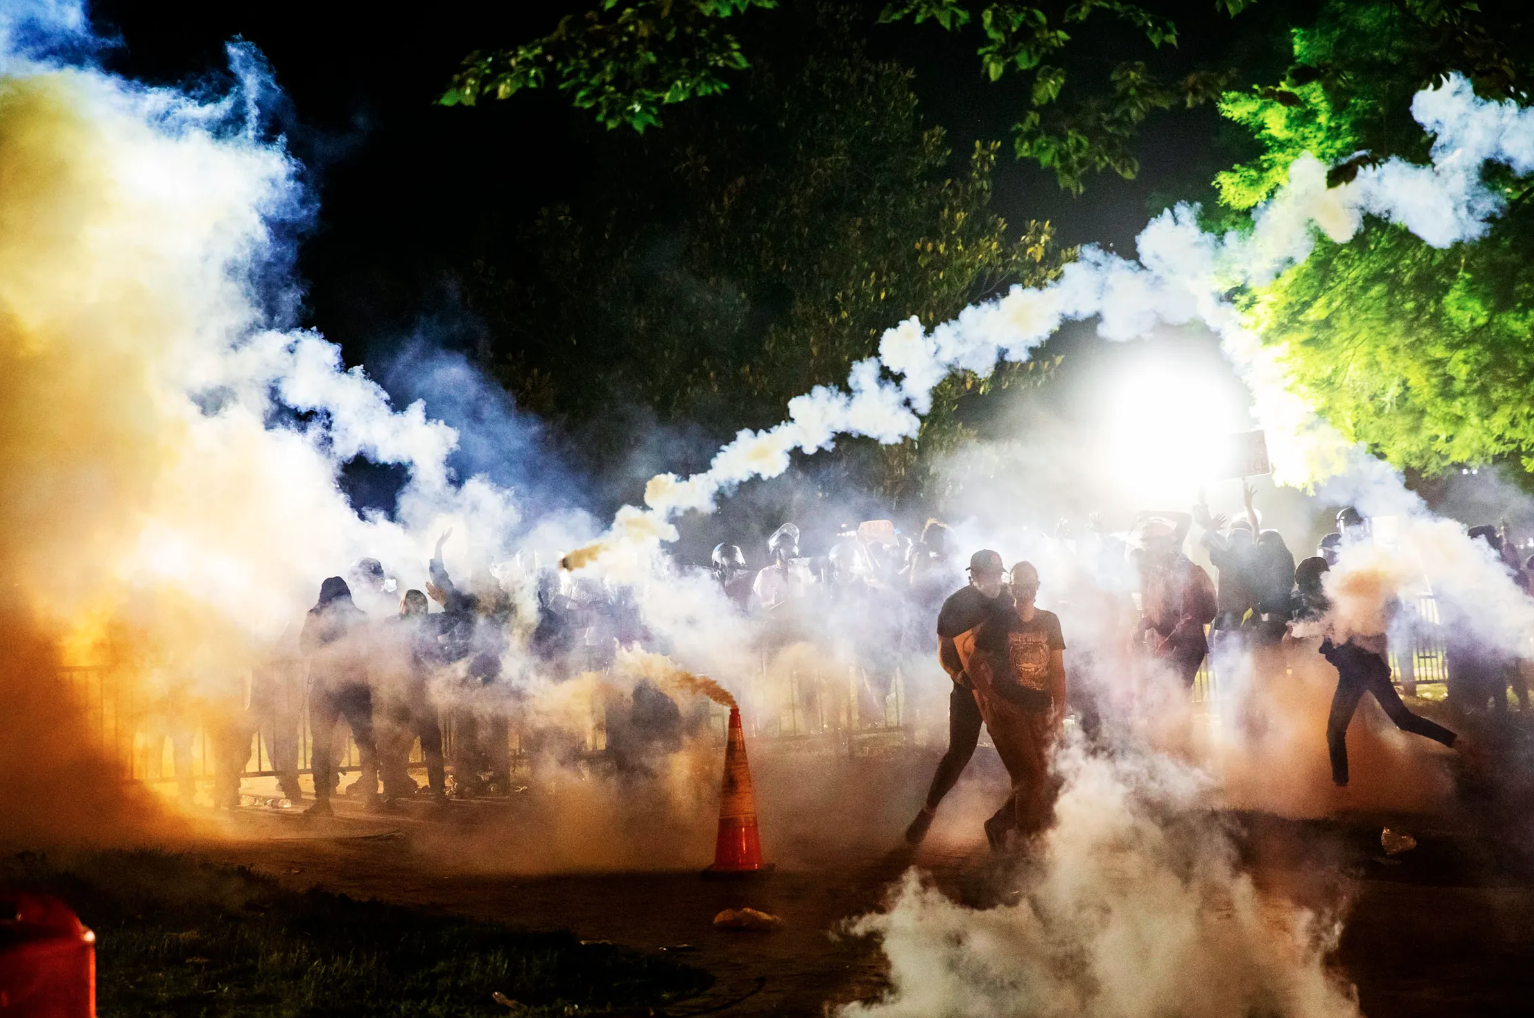 When victims are hit with tear gas, it causes fits of coughing and sneezing— a potentially potent recipe for spreading coronavirus.